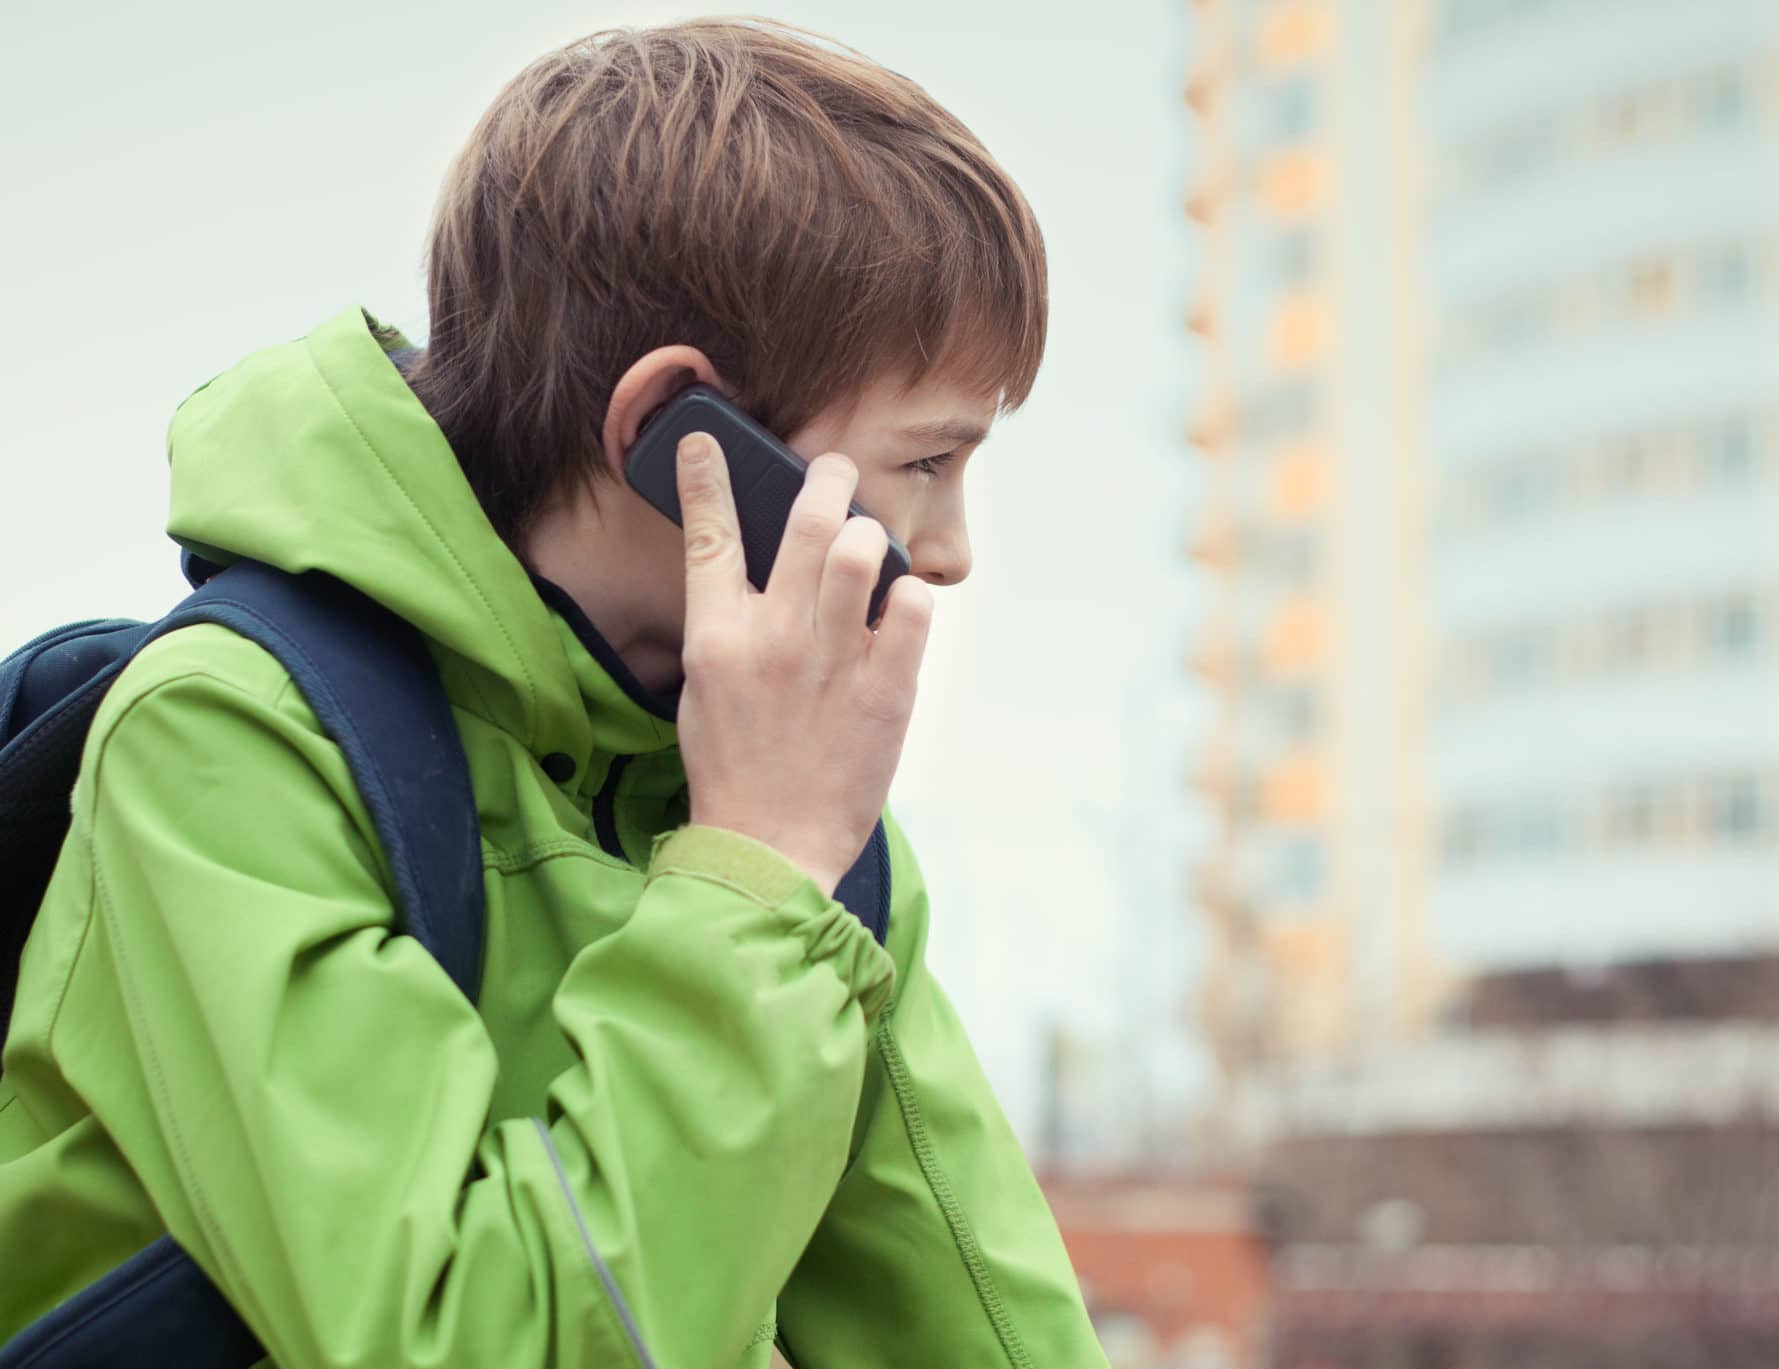 A boy holding a mobile phone to his ear